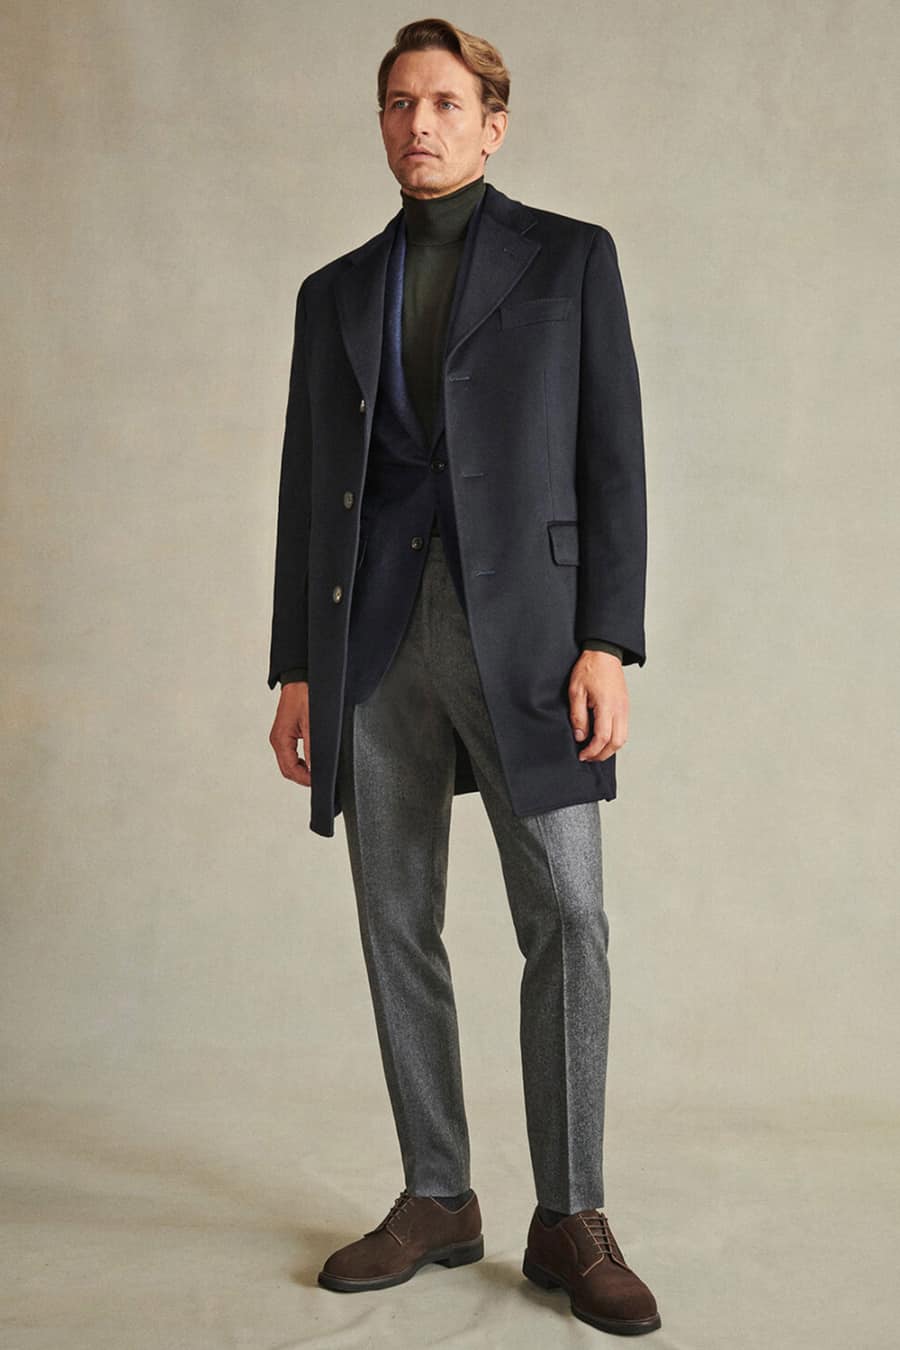 Men's grey wool trousers, green roll neck, navy blazer, navy overcoat and brown suede shoes